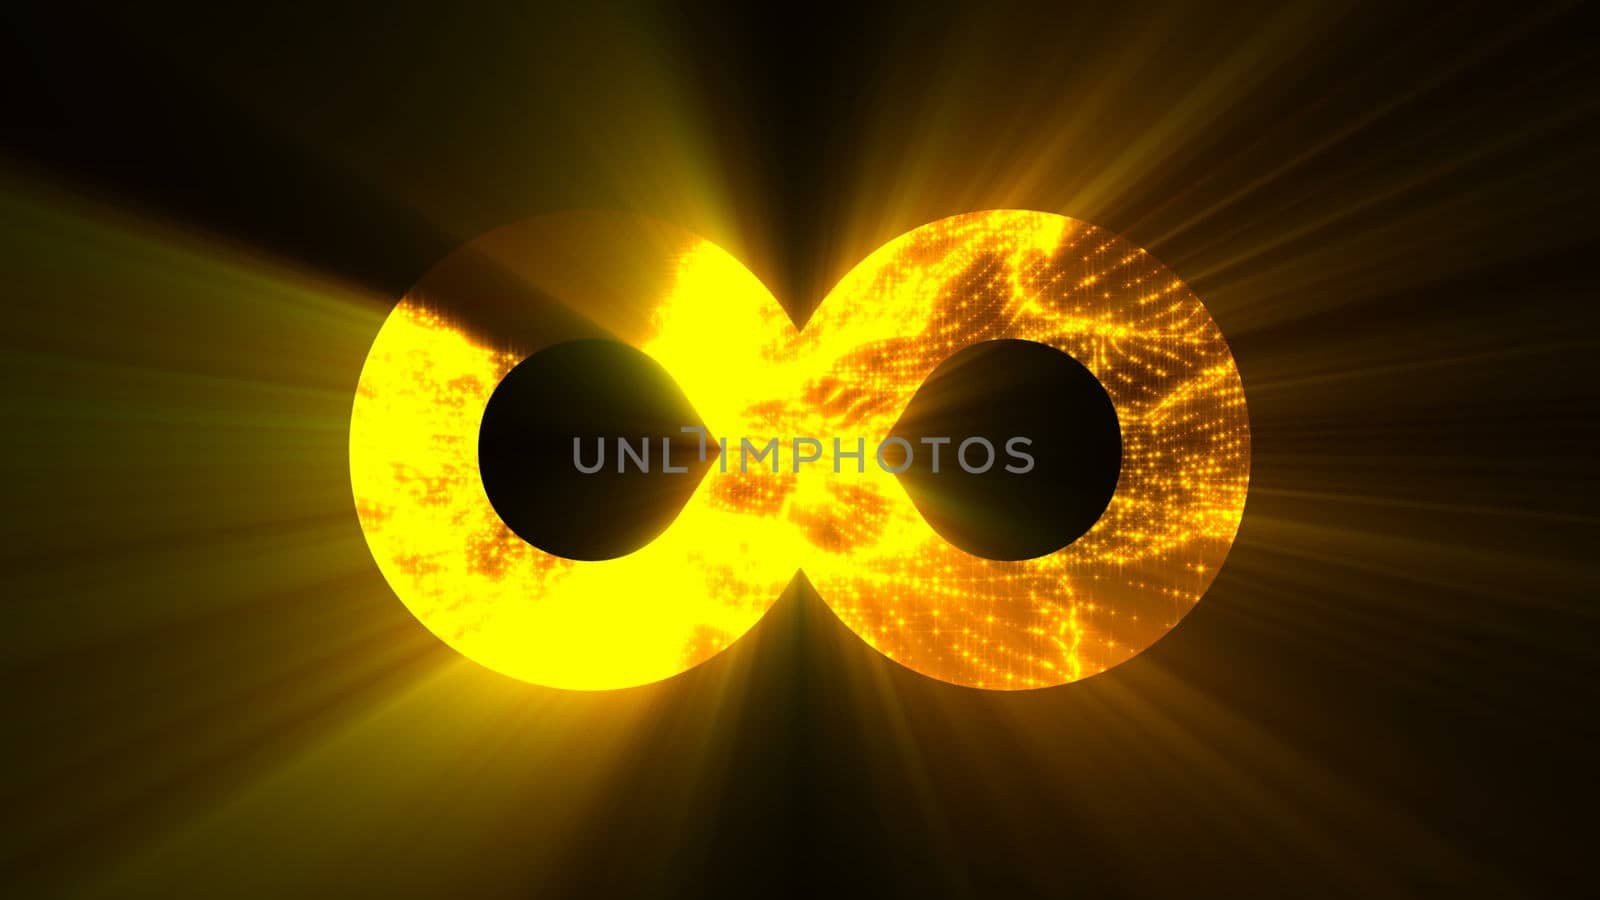 Abstract background with futuristic infinity sign. Digital background. 3d rendering